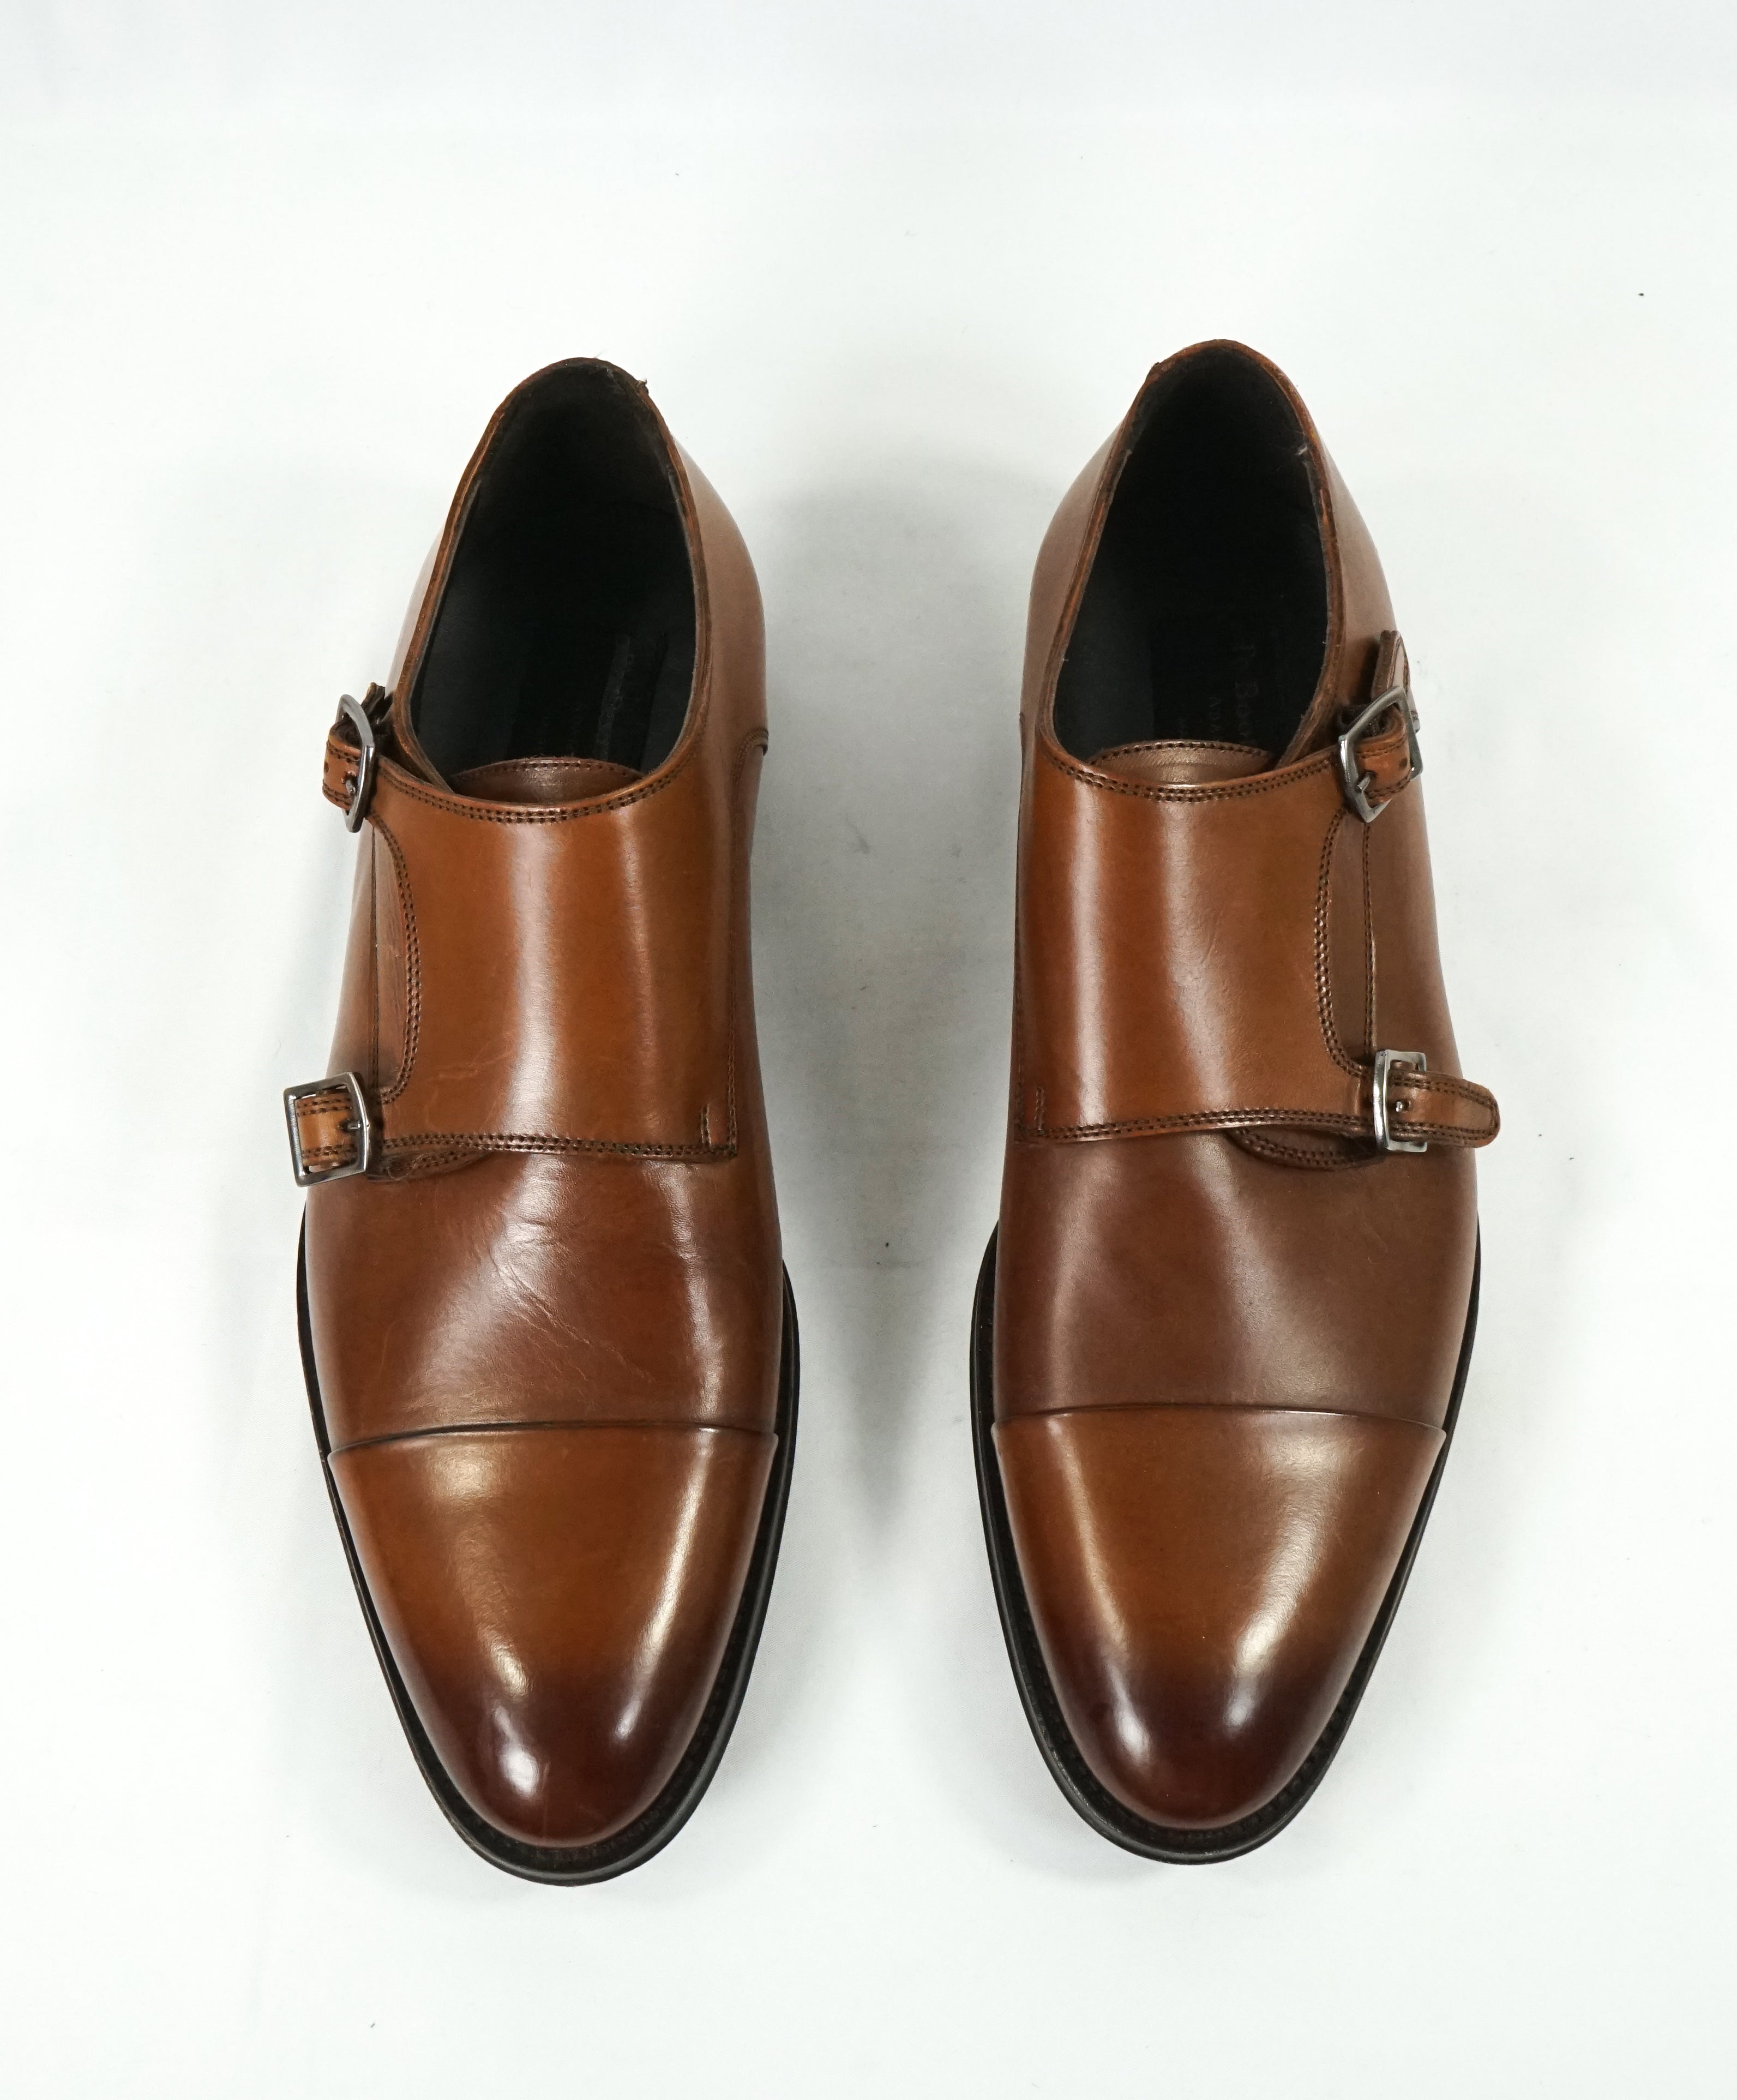 too boot new york monk strap